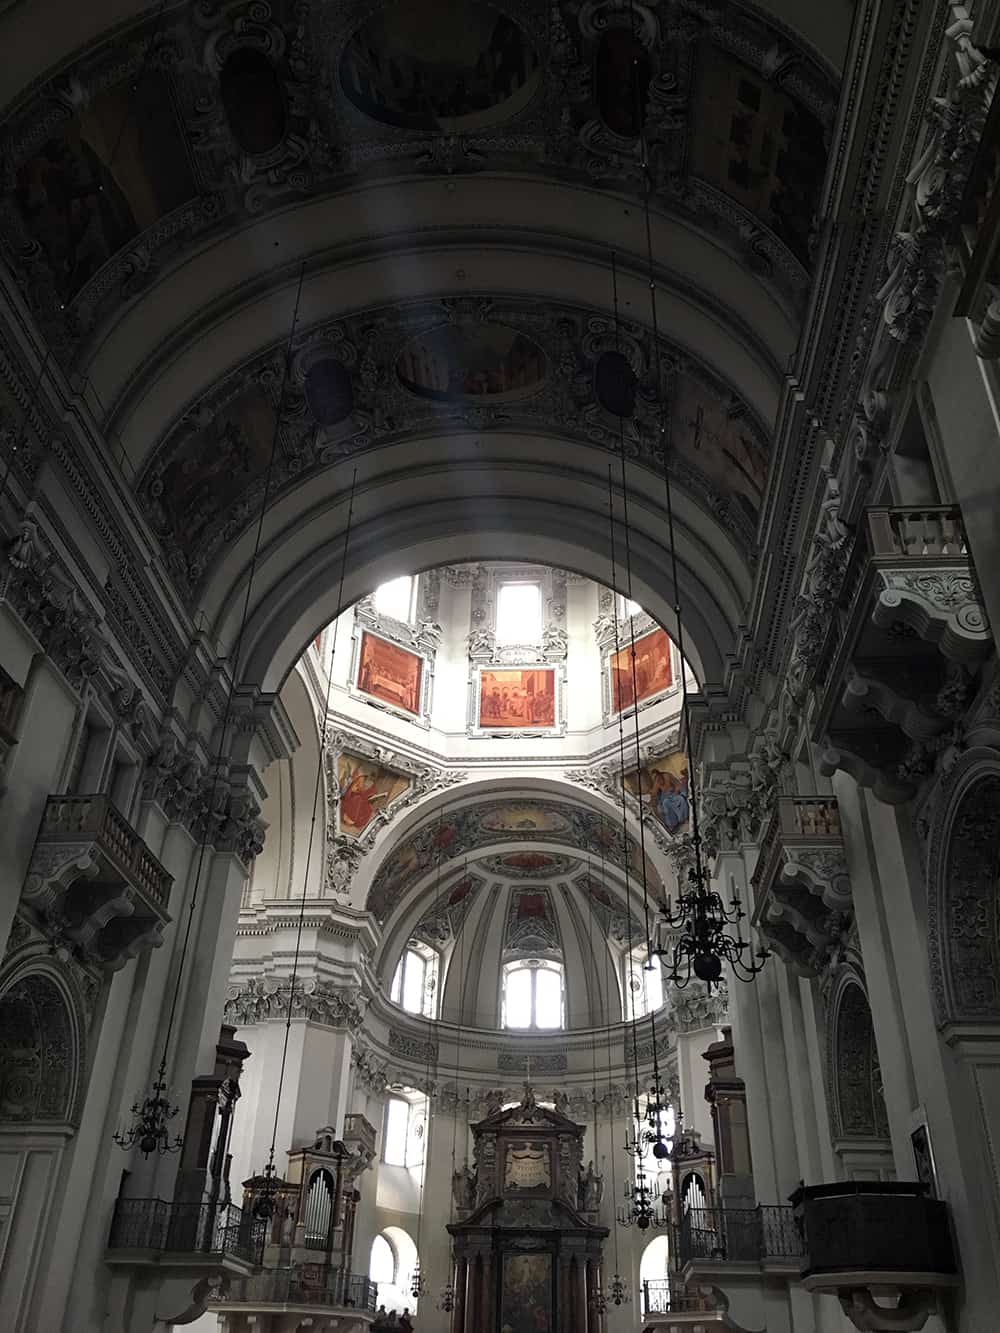 On our self-made walking tour of we visited the Salzburg Cathedral in Salzburg, Austria. | via Autumn All Along